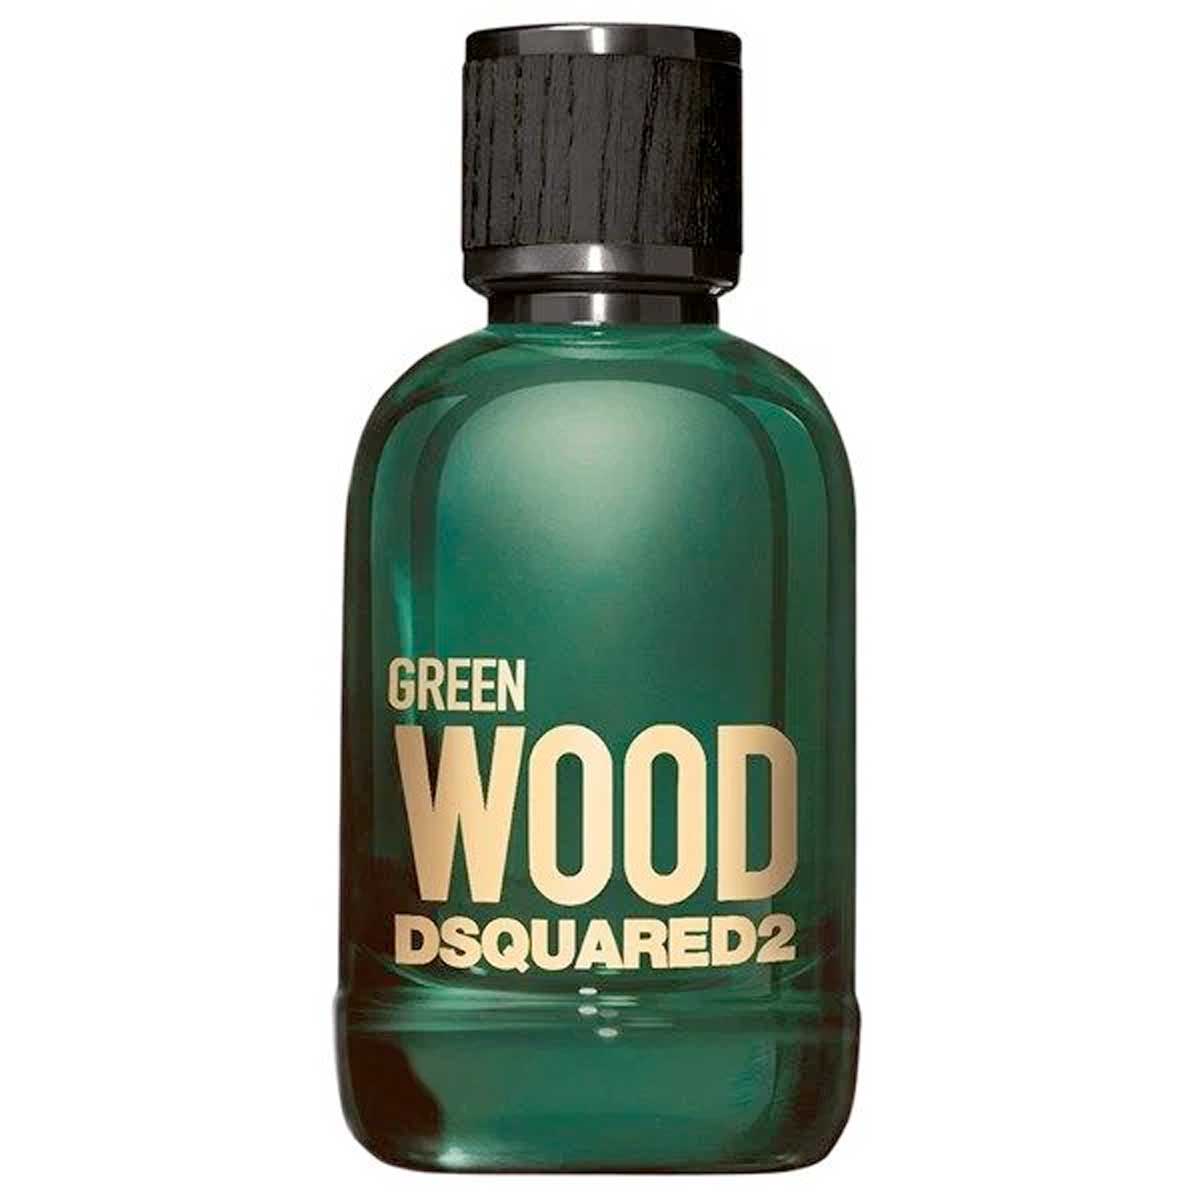 DSQUARED2 Green Wood Pour Homme